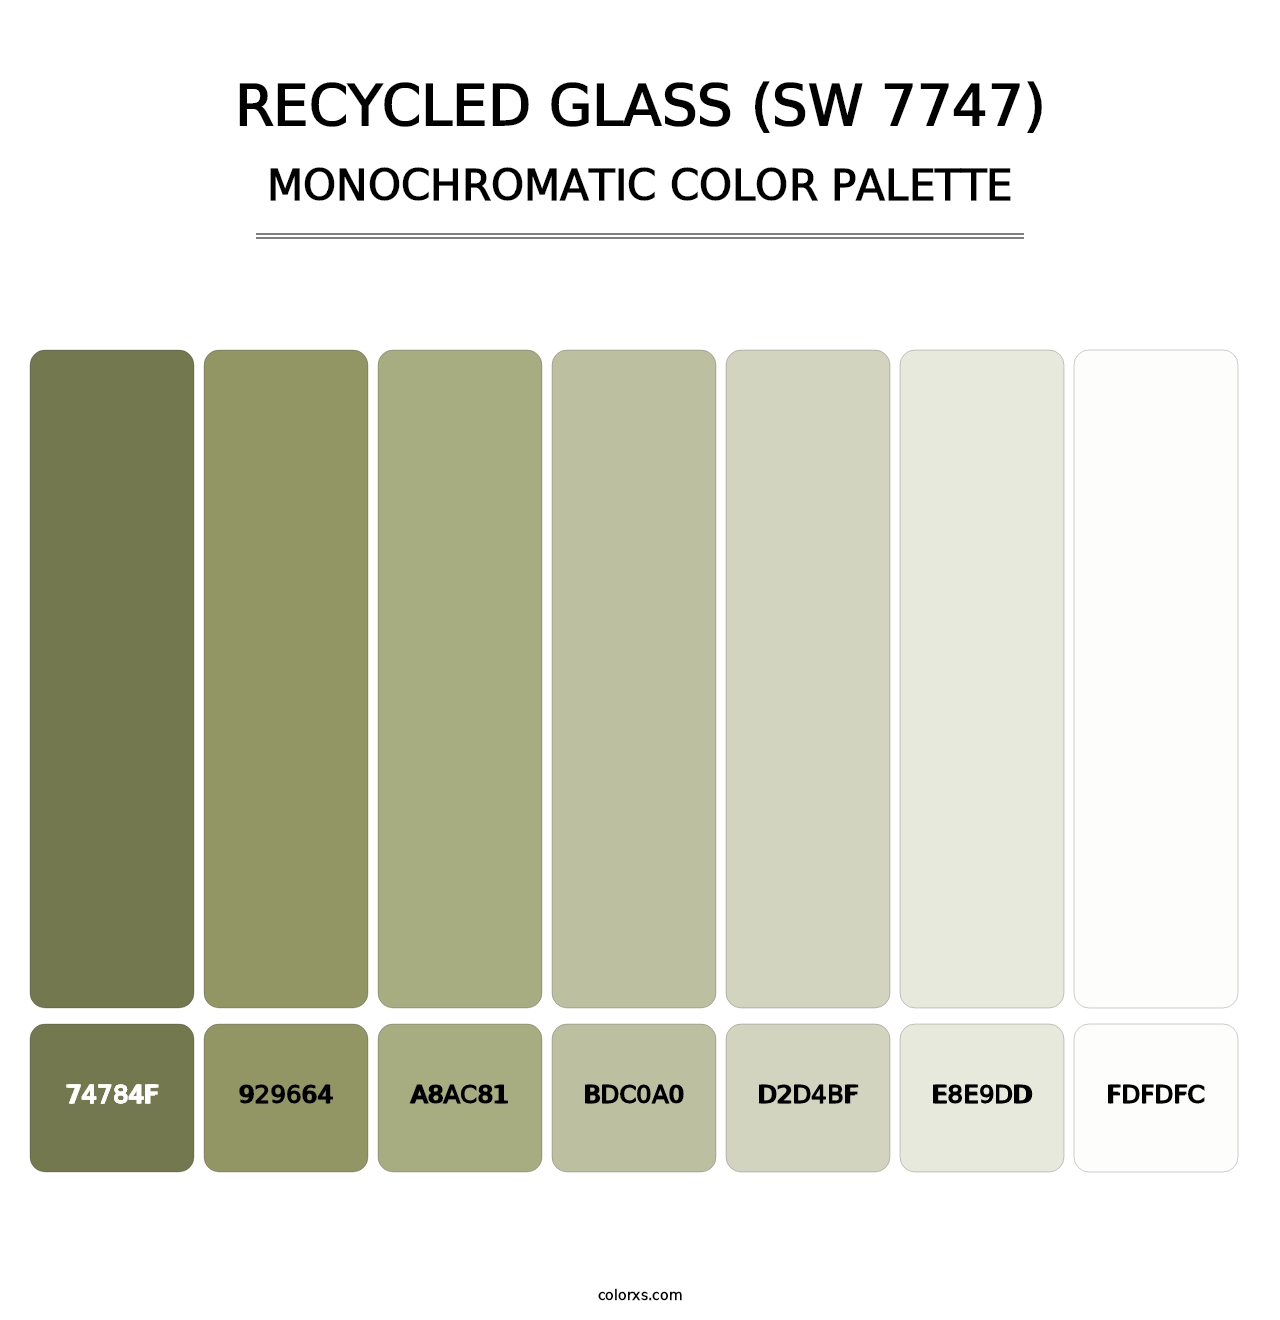 Recycled Glass (SW 7747) - Monochromatic Color Palette